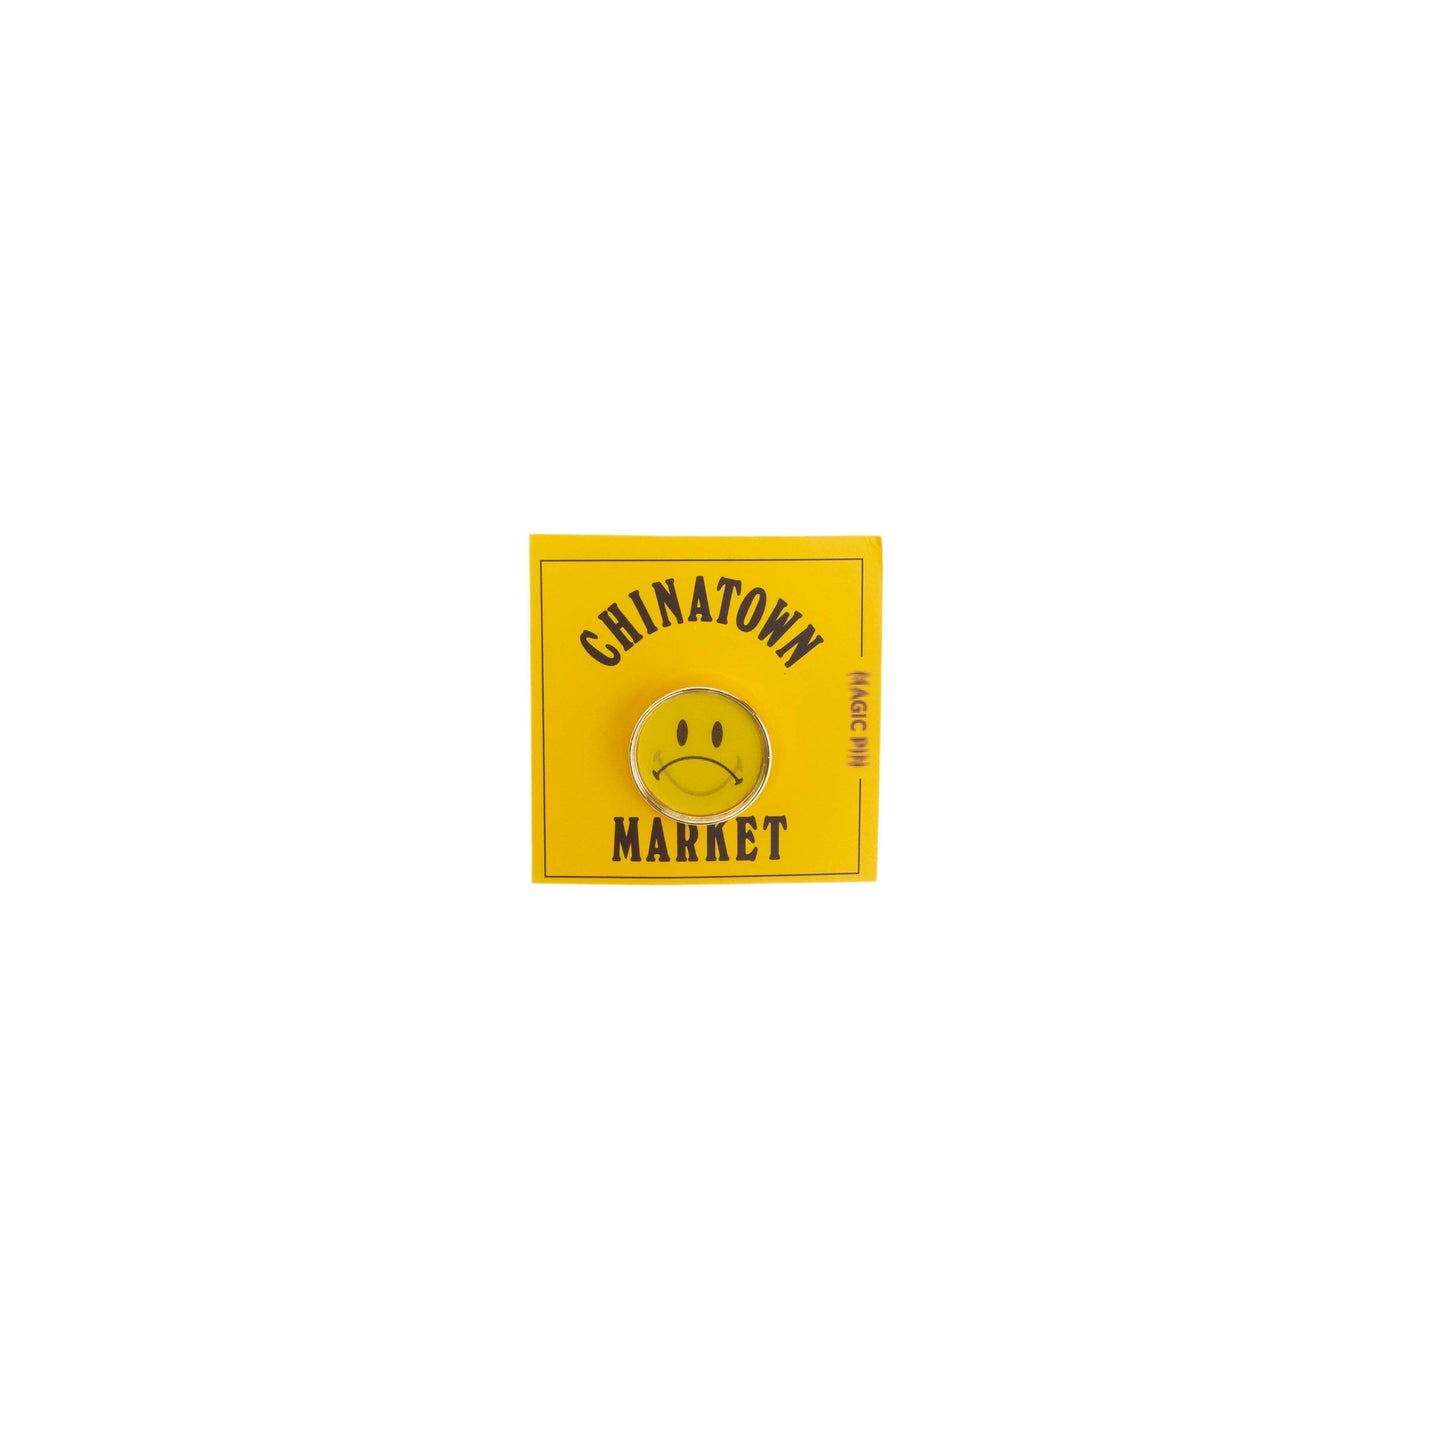 Chinatown Market Lenticular Smiley Face Pin-Chinatown Market